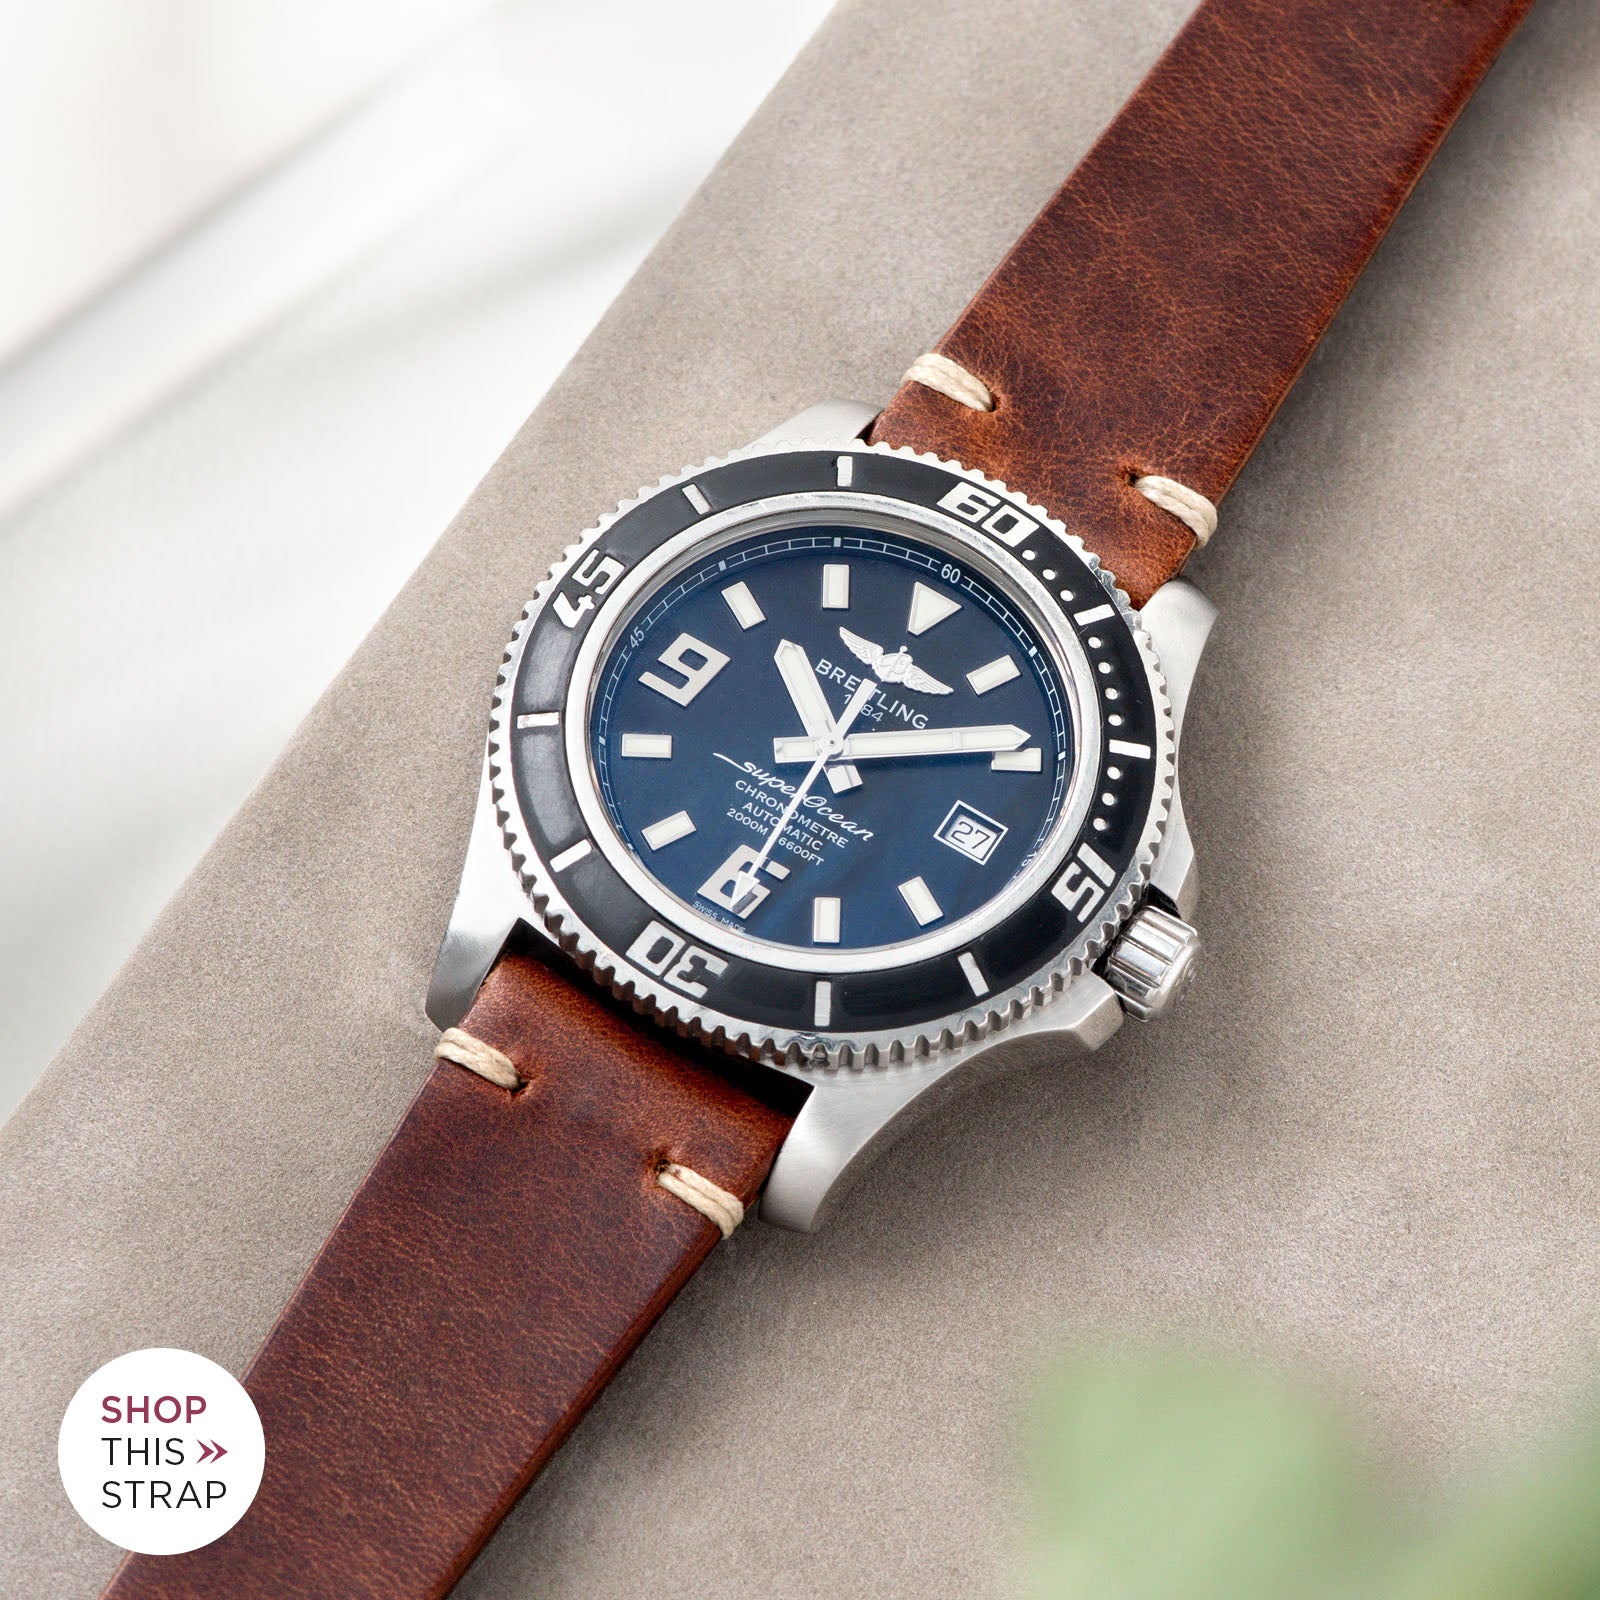 Bulang and Sons_Strap Guide_Breitling Superocean 44_Siena Brown Leather Watch Strap